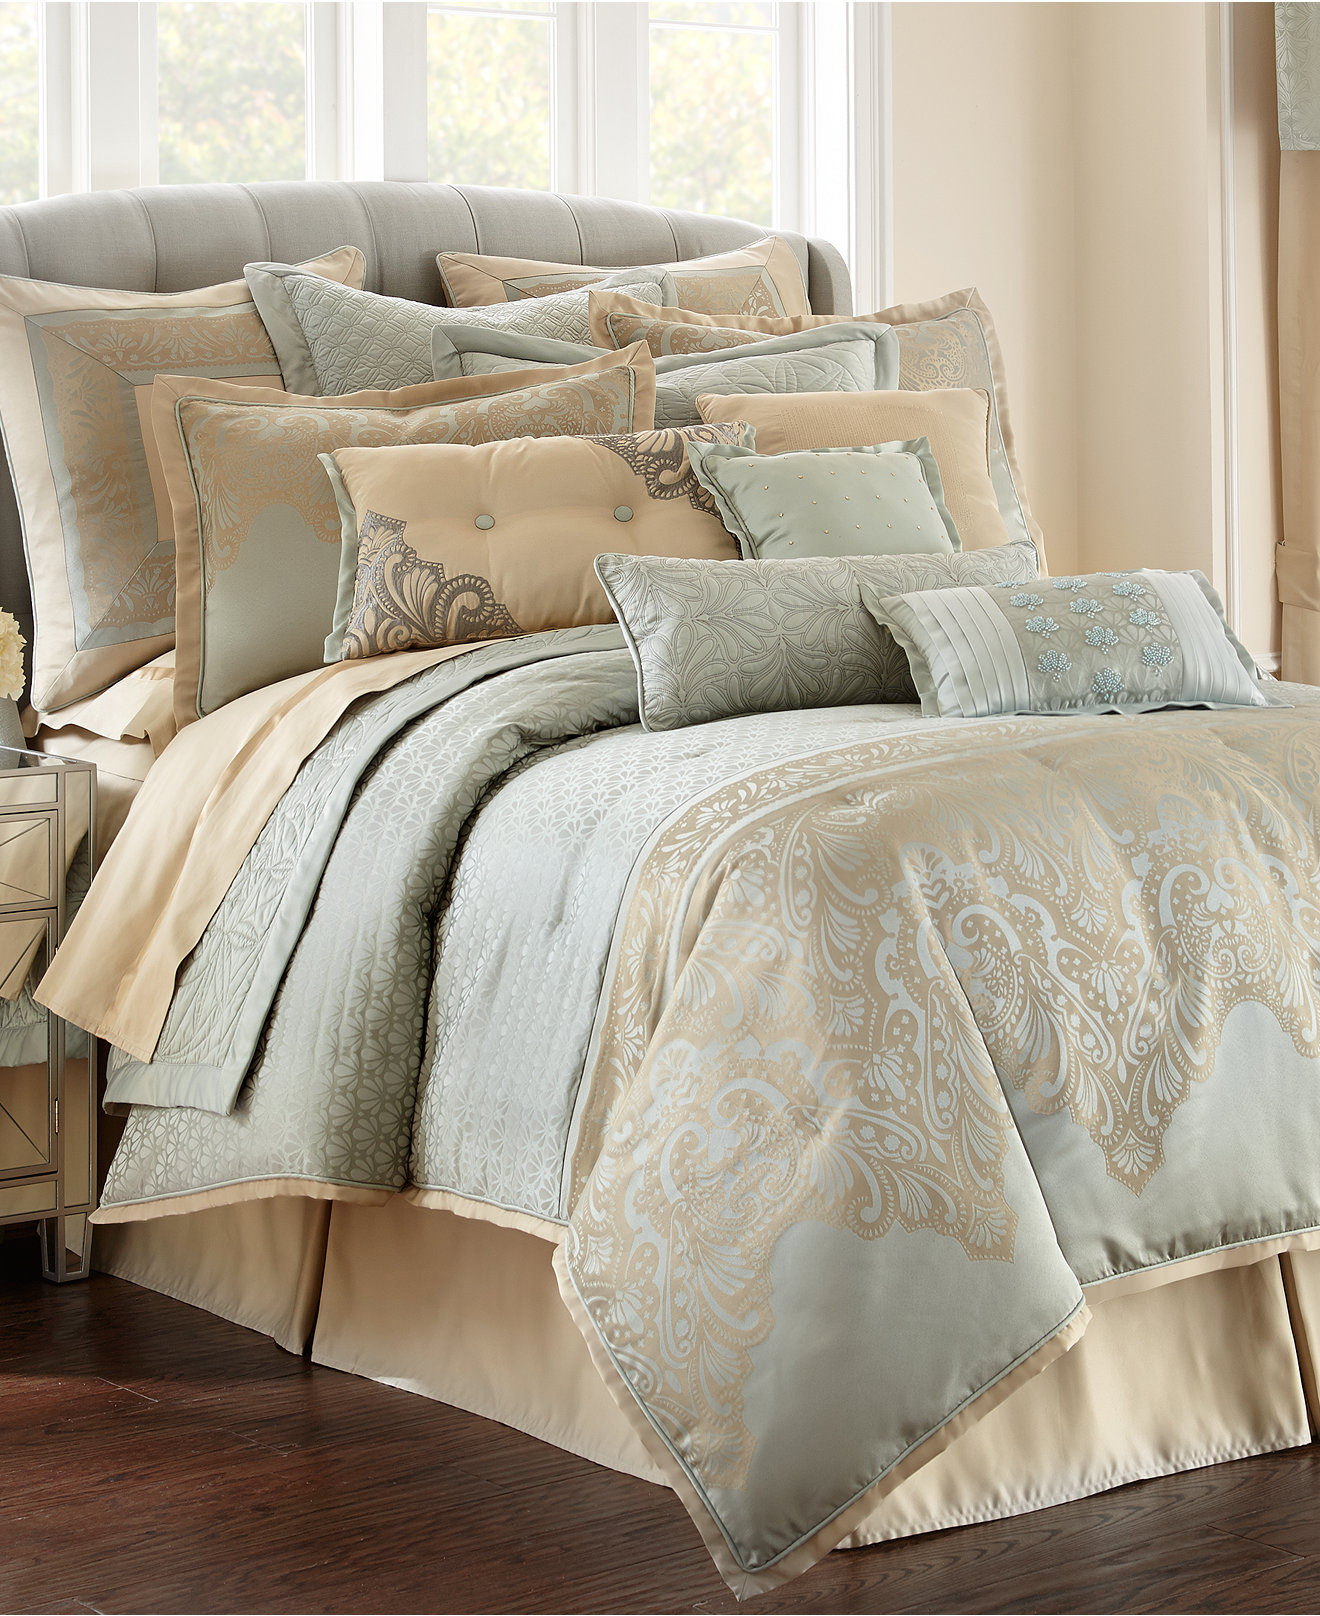 What are the different types of Waterford comforter sets?